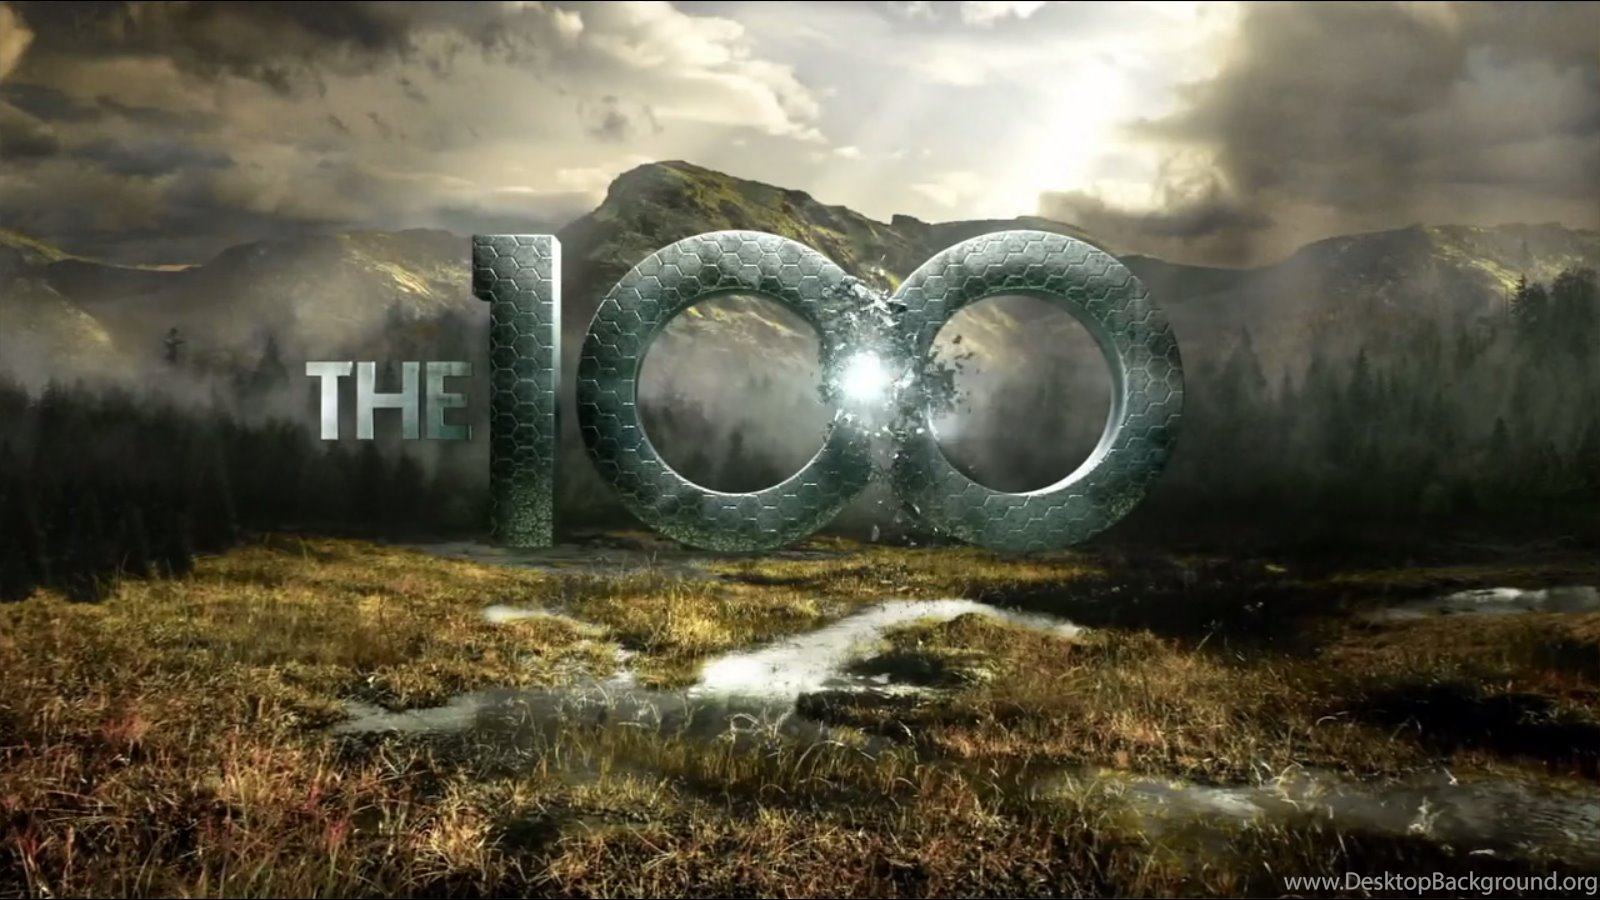 The 100 Hd Wallpapers